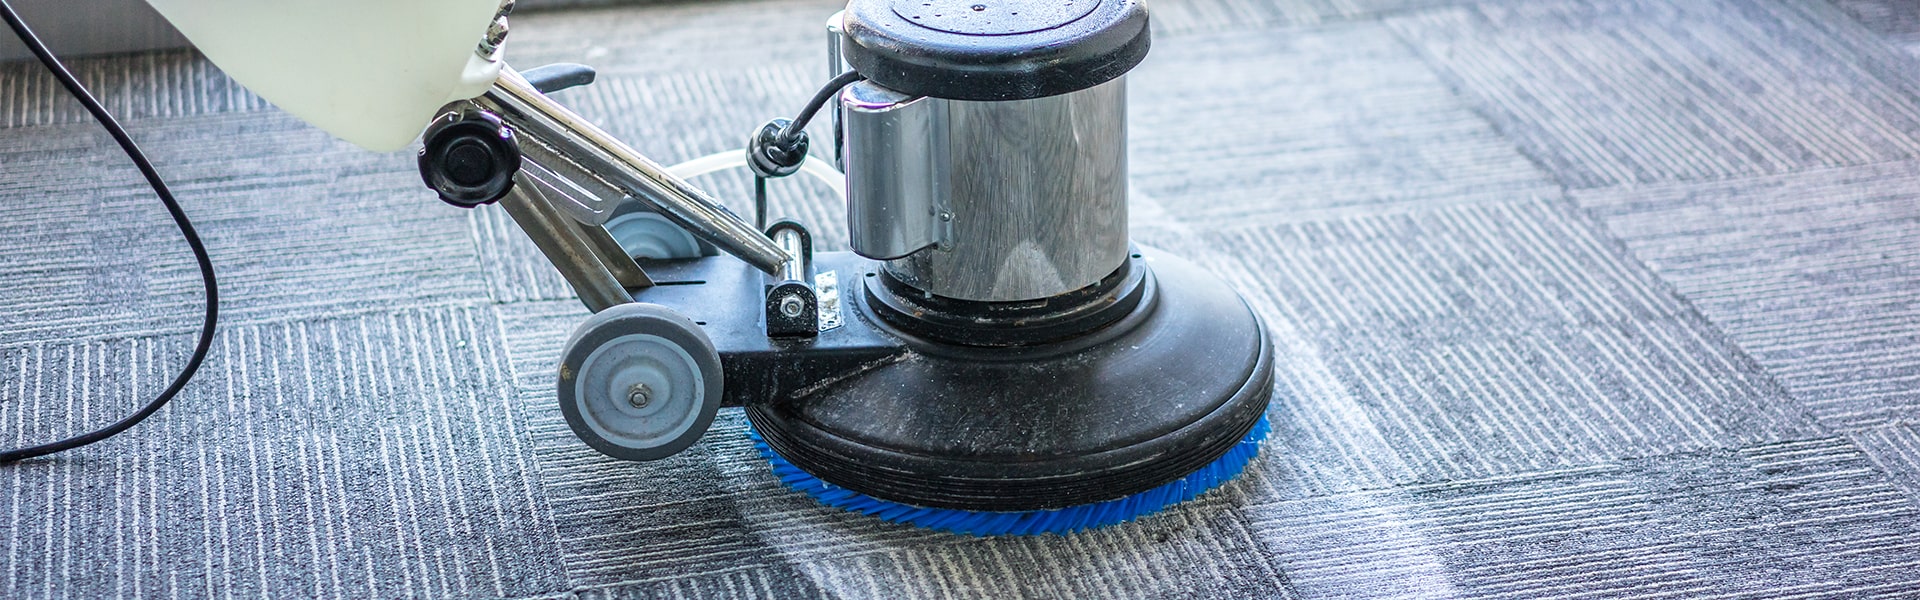 Different Methods of Carpet Cleaning